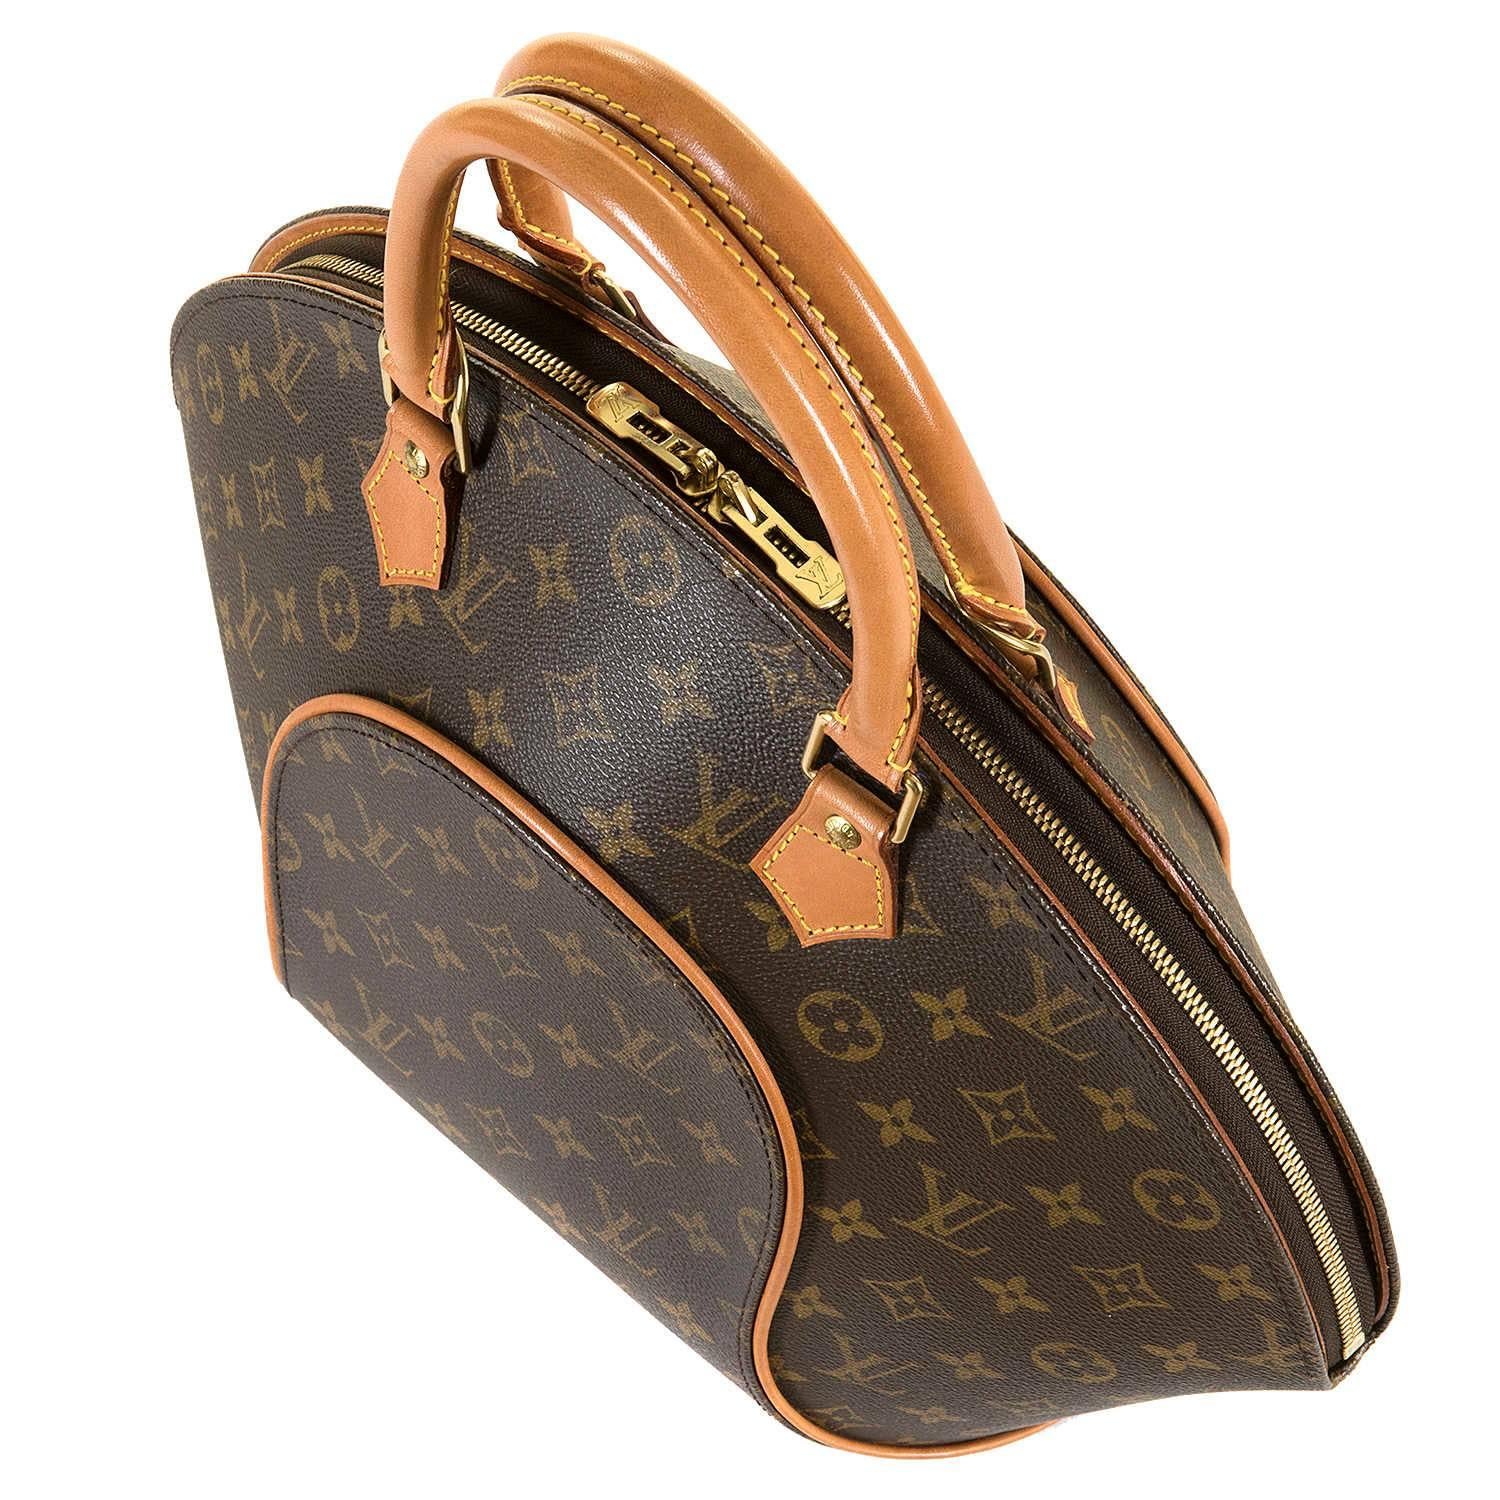 The Classic Louis Vuitton GM 'Sac Ellipse' in Monogrammed Toile with Natural Leather Trim. In excellent condition throughout, including the gold-tone hardware and importantly the natural leather trim, this iconic sculptured bag is fitted with two